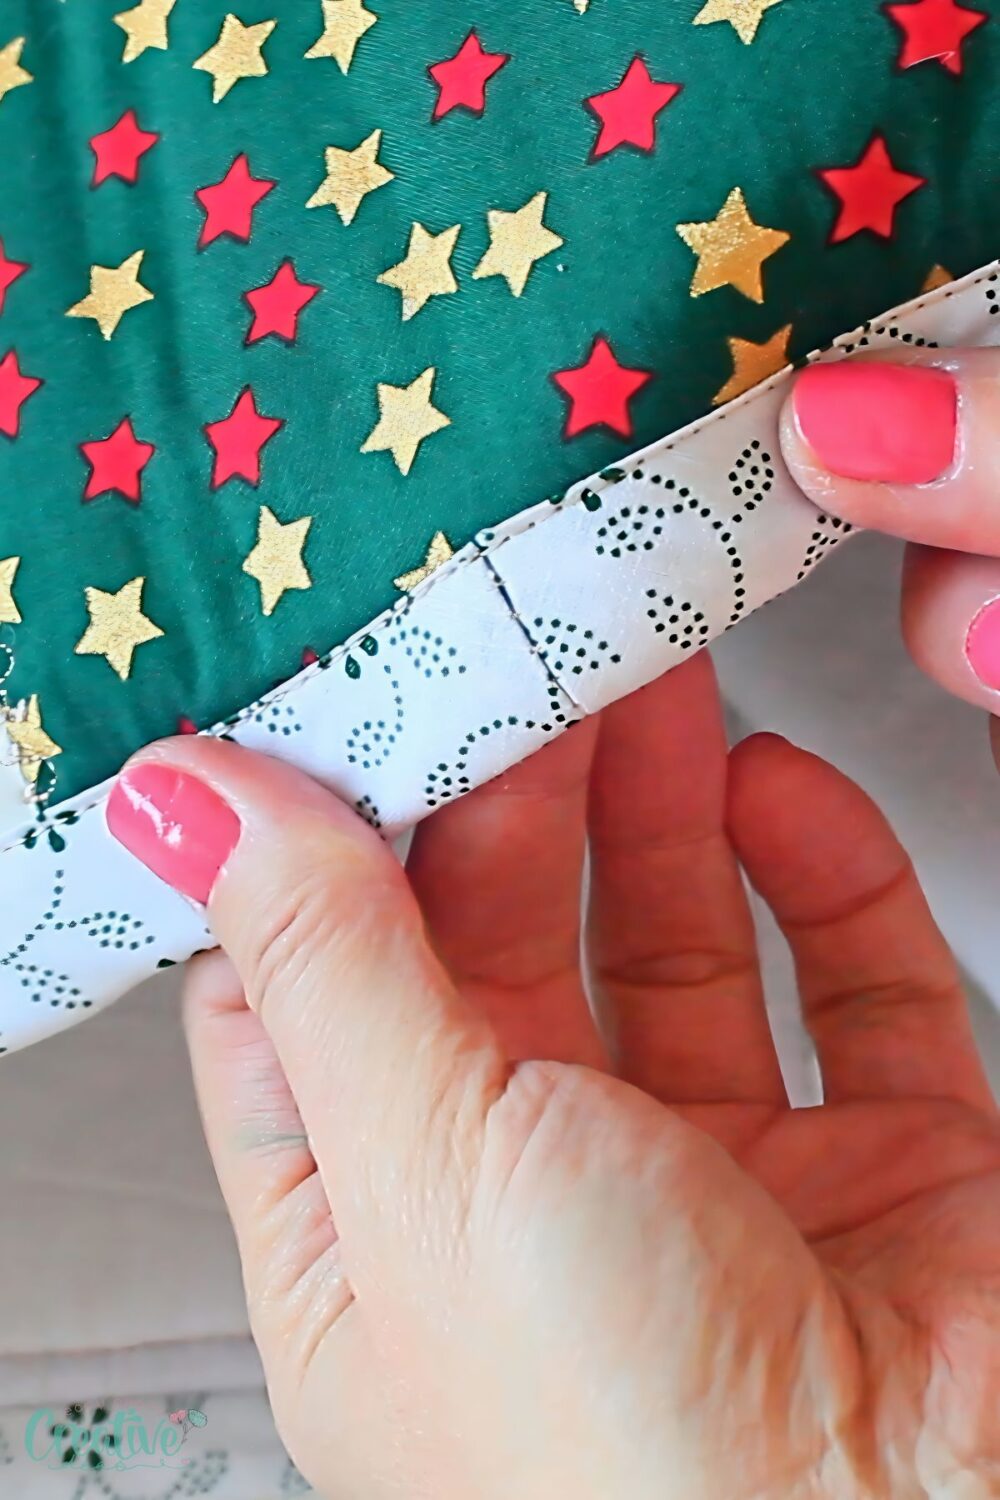 Learn how to join bias binding ends flawlessly and achieve perfectly finished edges with these valuable sewing tips provided in a step-by-step guide.